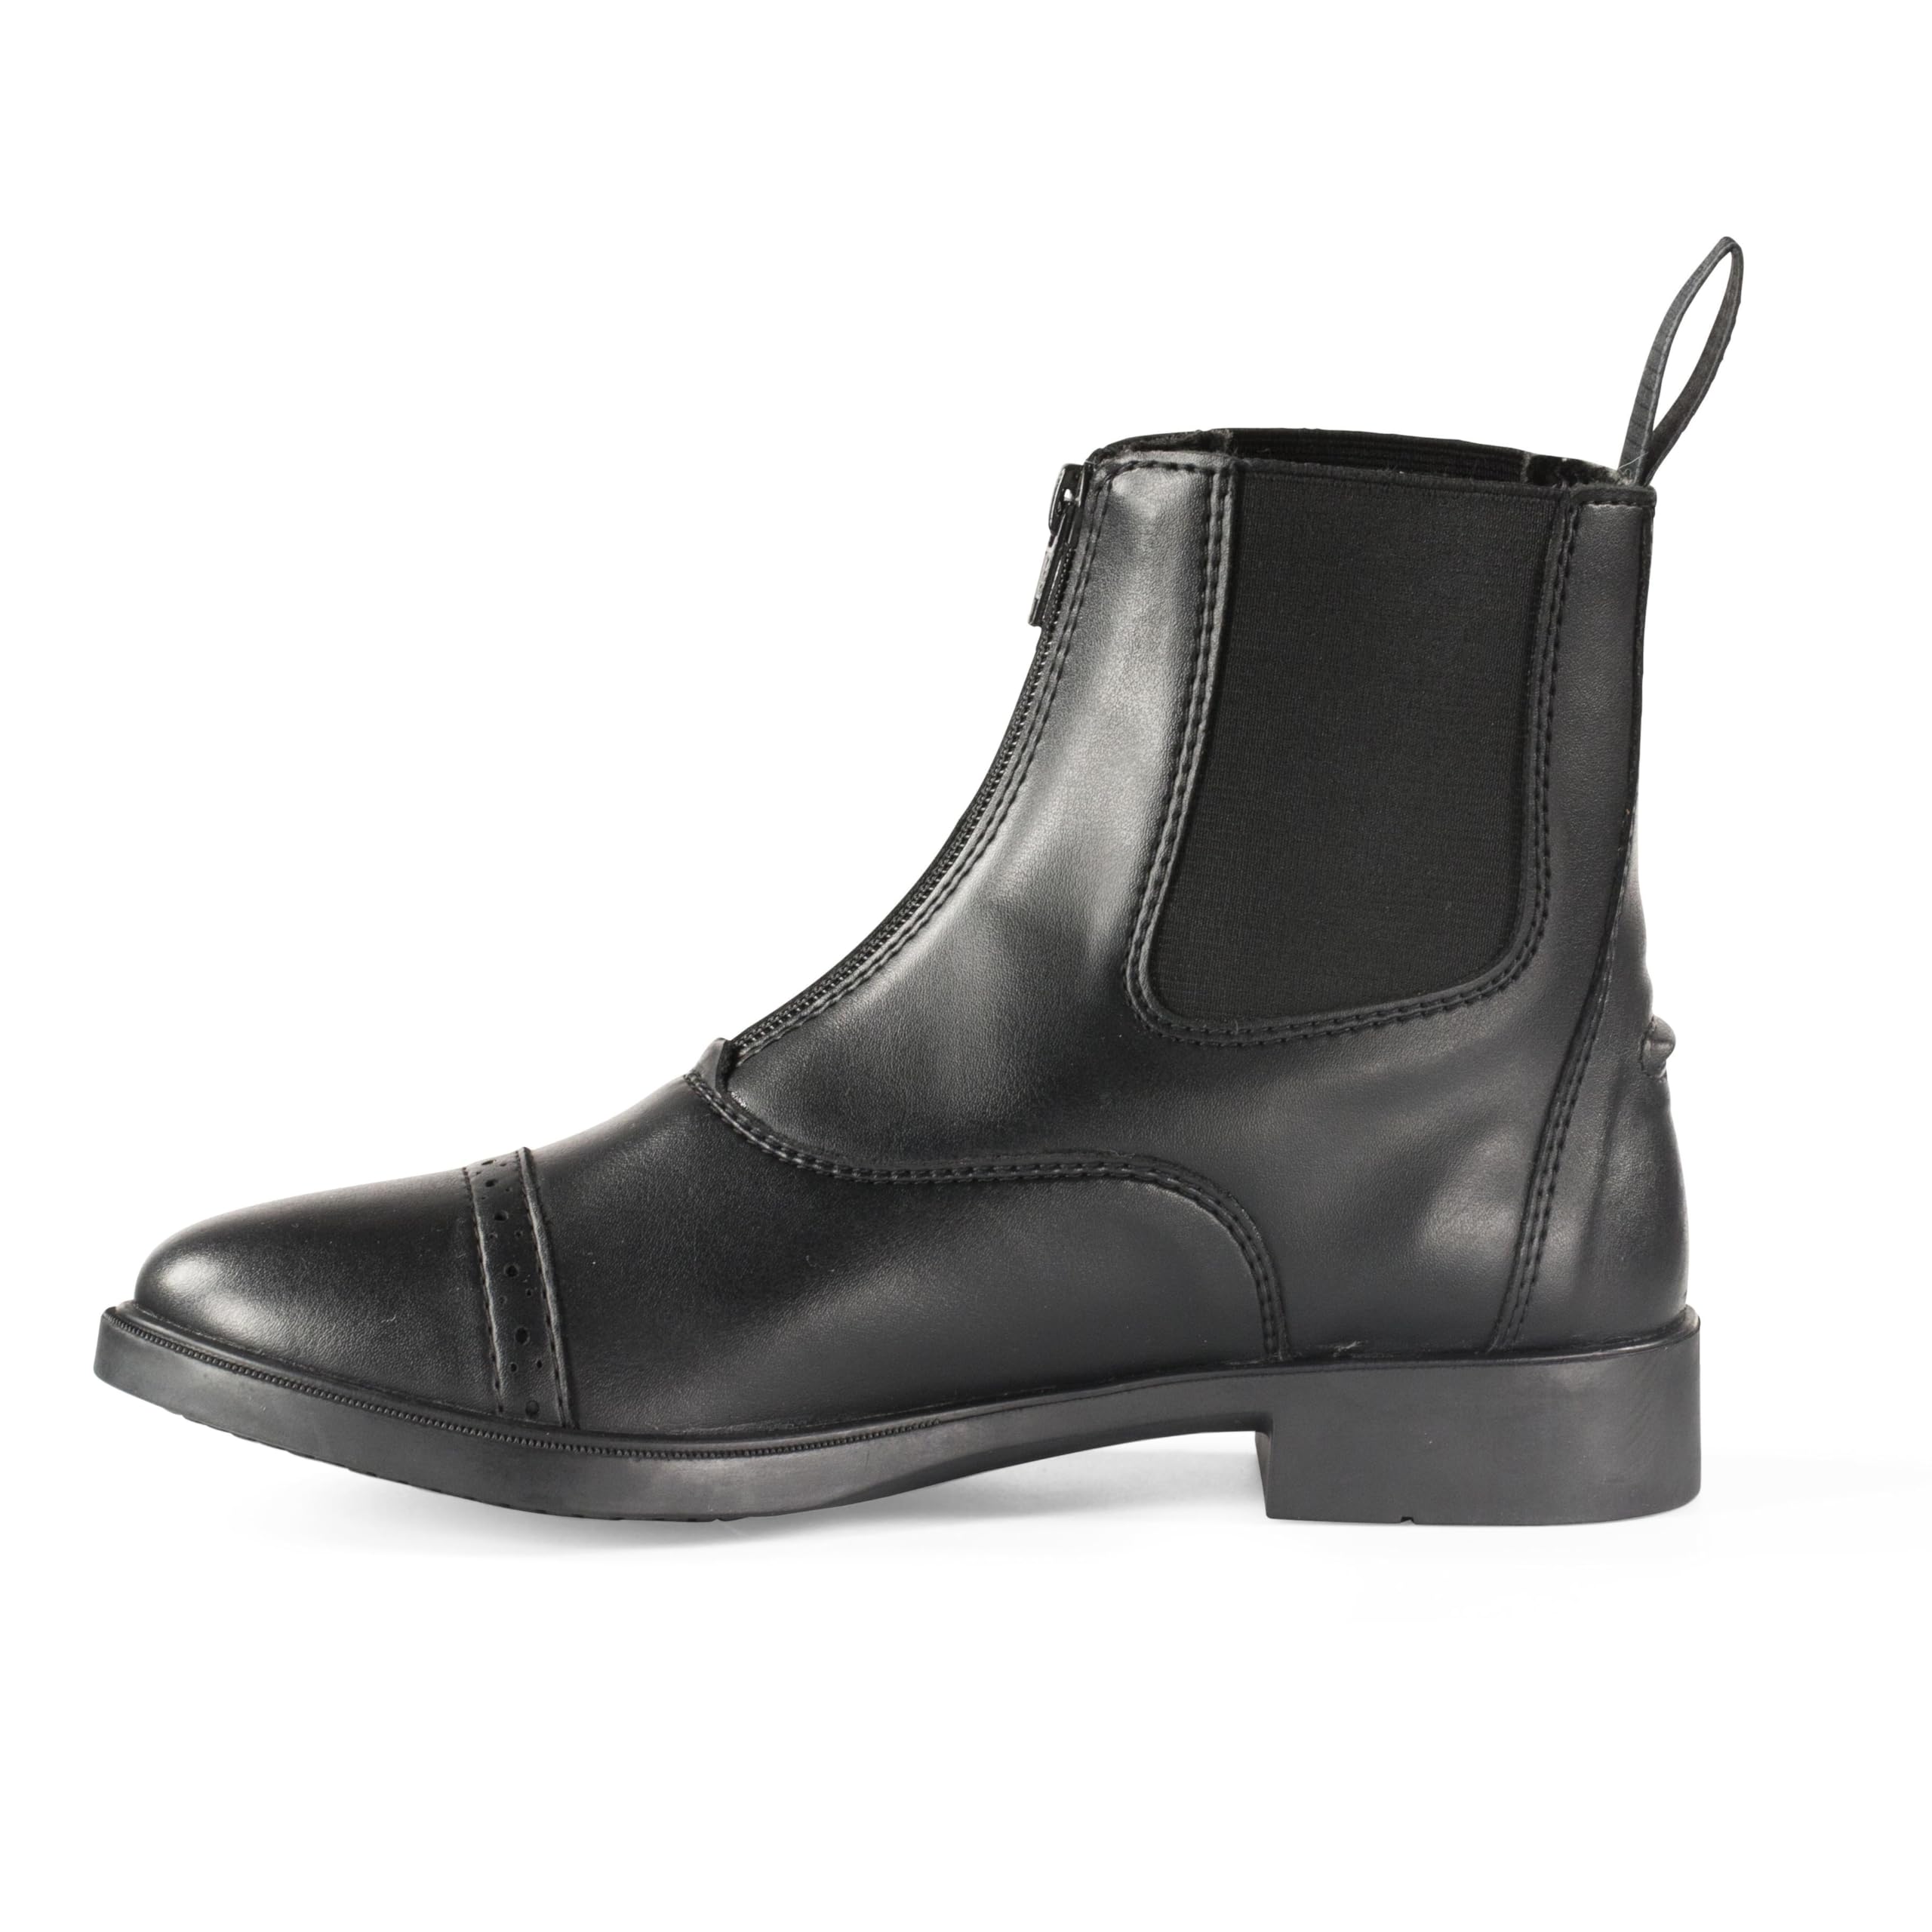 HORZE Wexford Women's Equestrian Synthetic Leather Zip-Up Schooling Paddock Boots - Black - 7